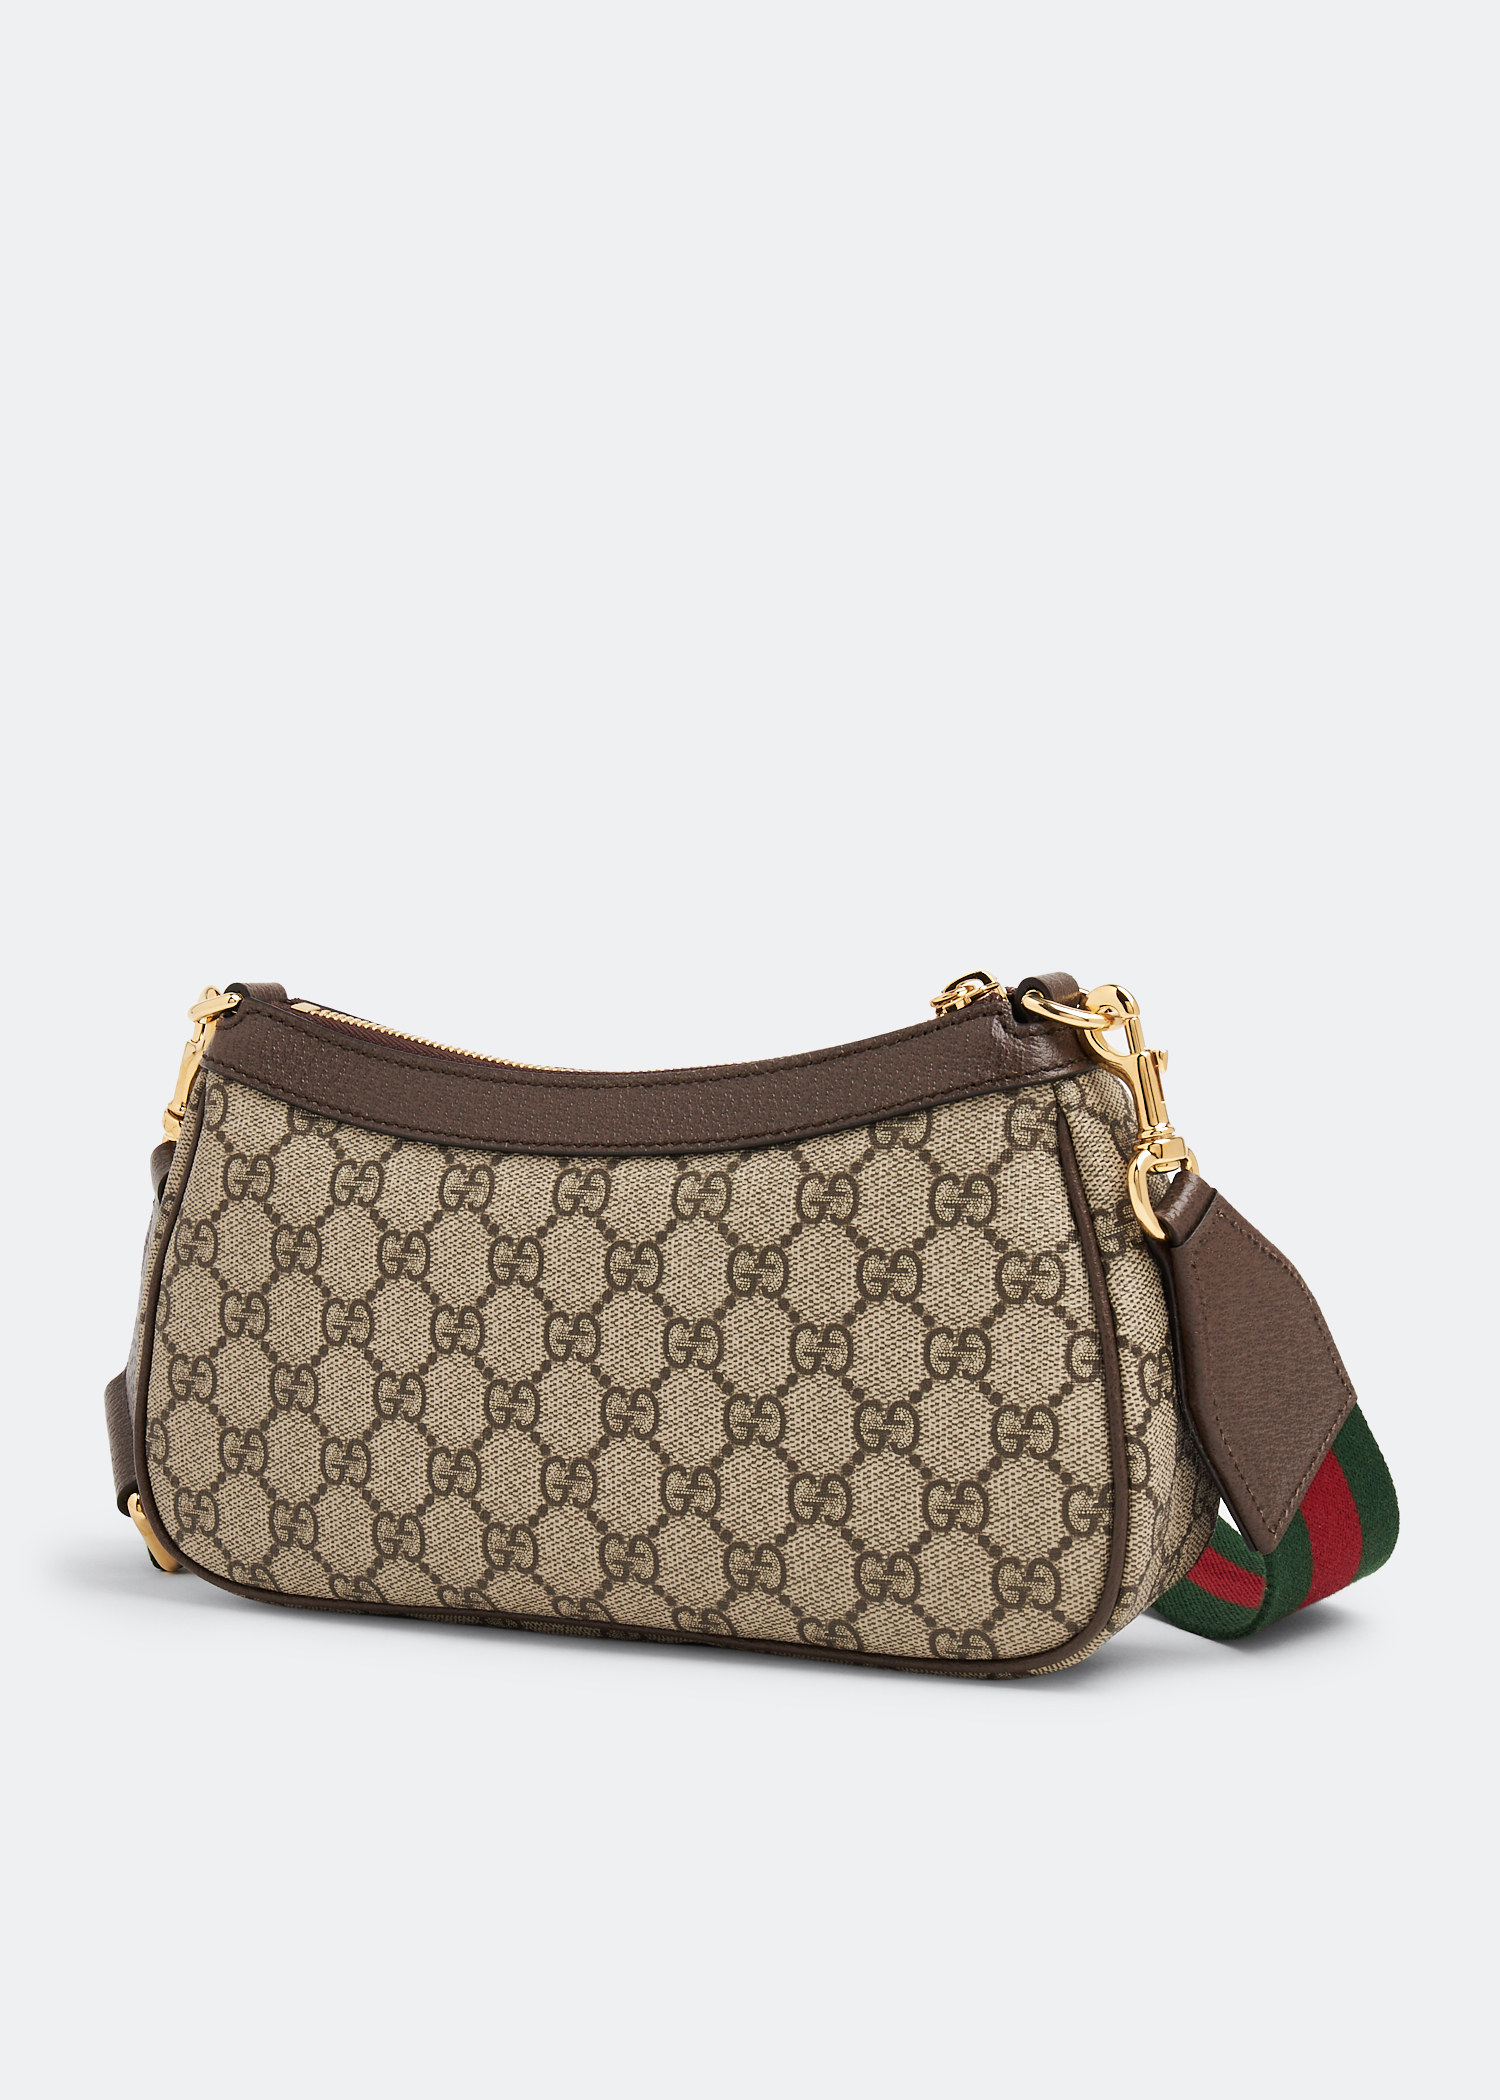 Gucci Ophidia small handbag for Women - Brown in UAE